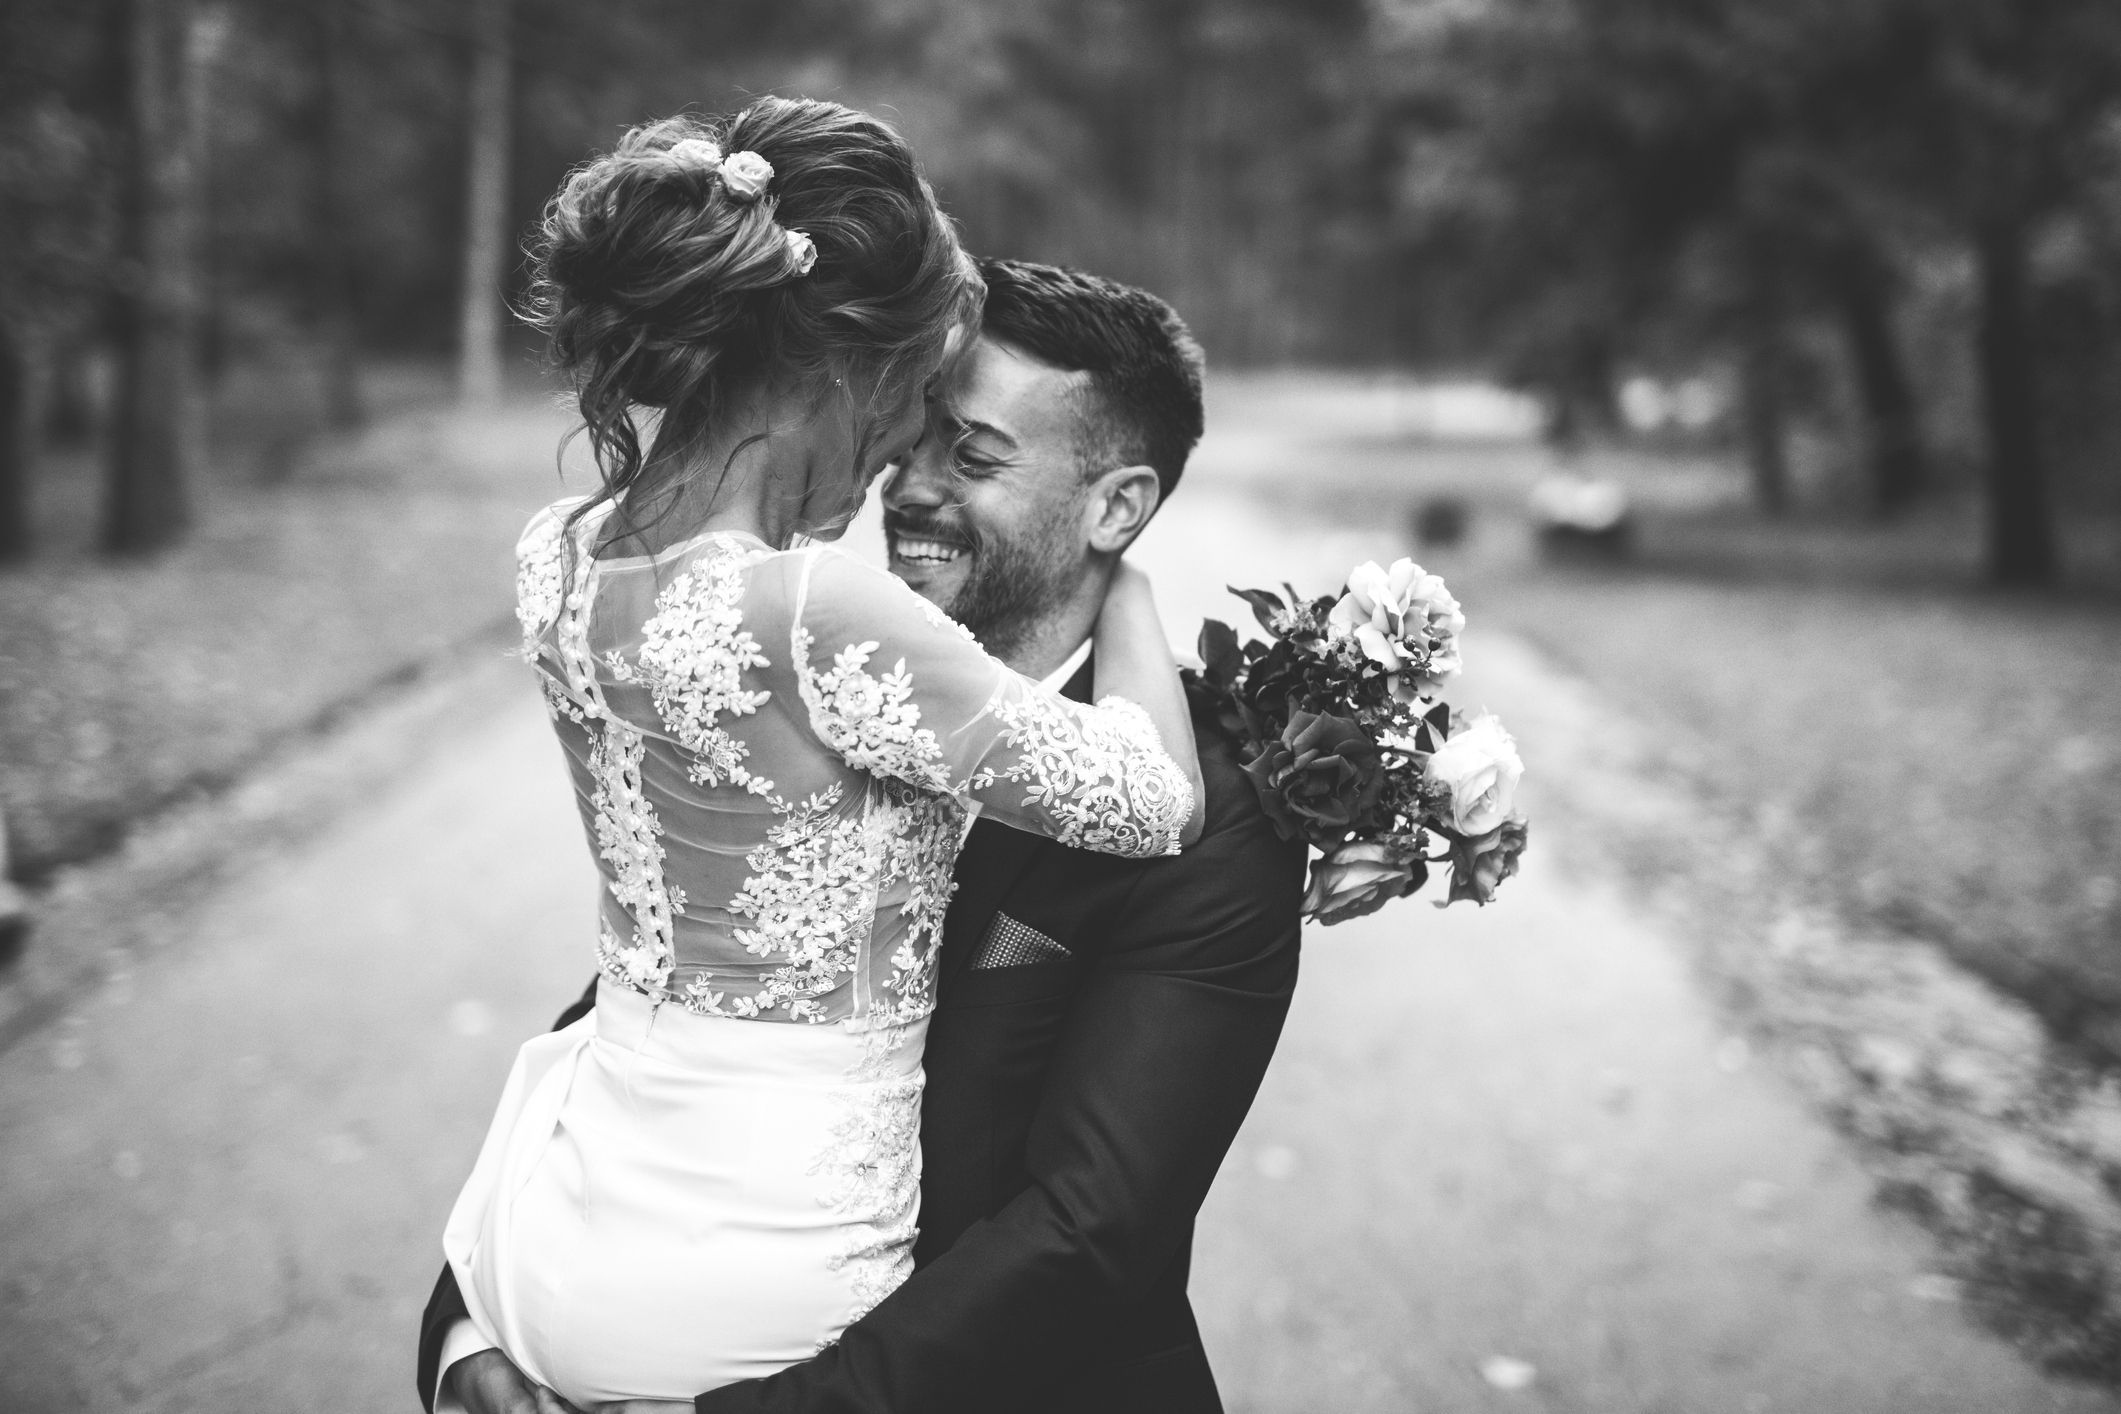 Top 51+ Trending Captions For Wedding Photos! (Cute To Quirky Ones Included)